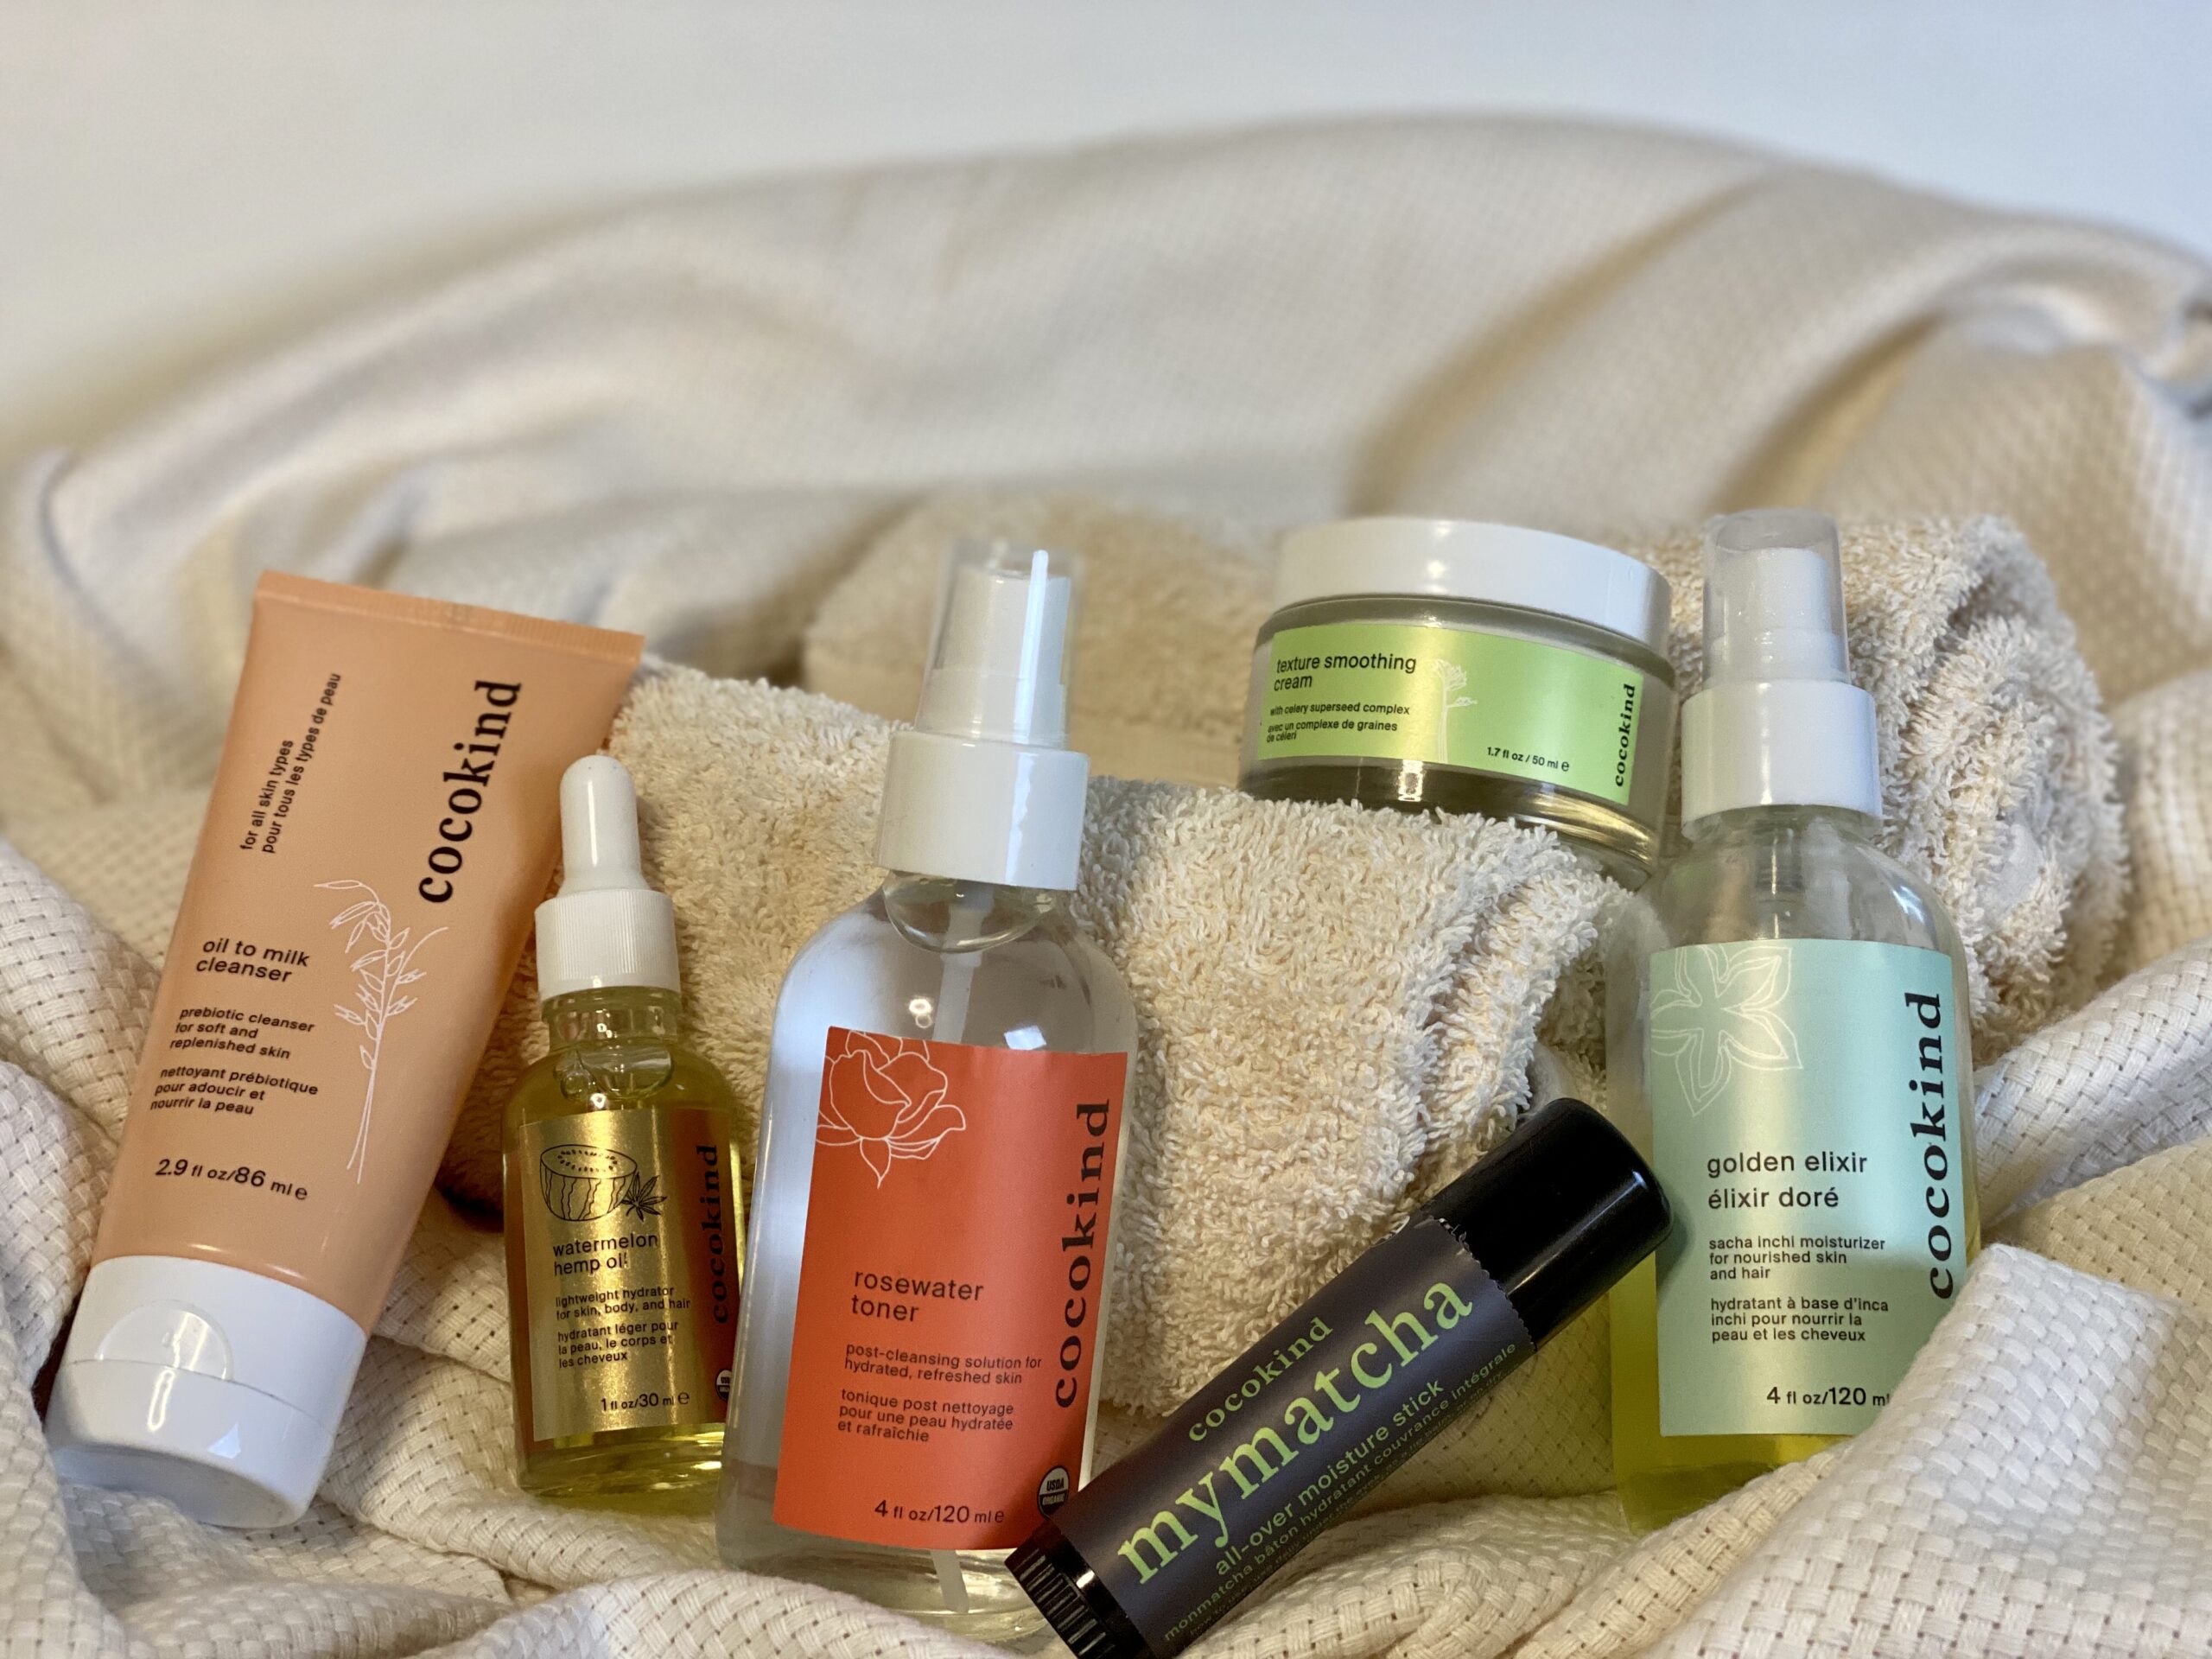 Why Cocokind is my Favorite Skincare Brand